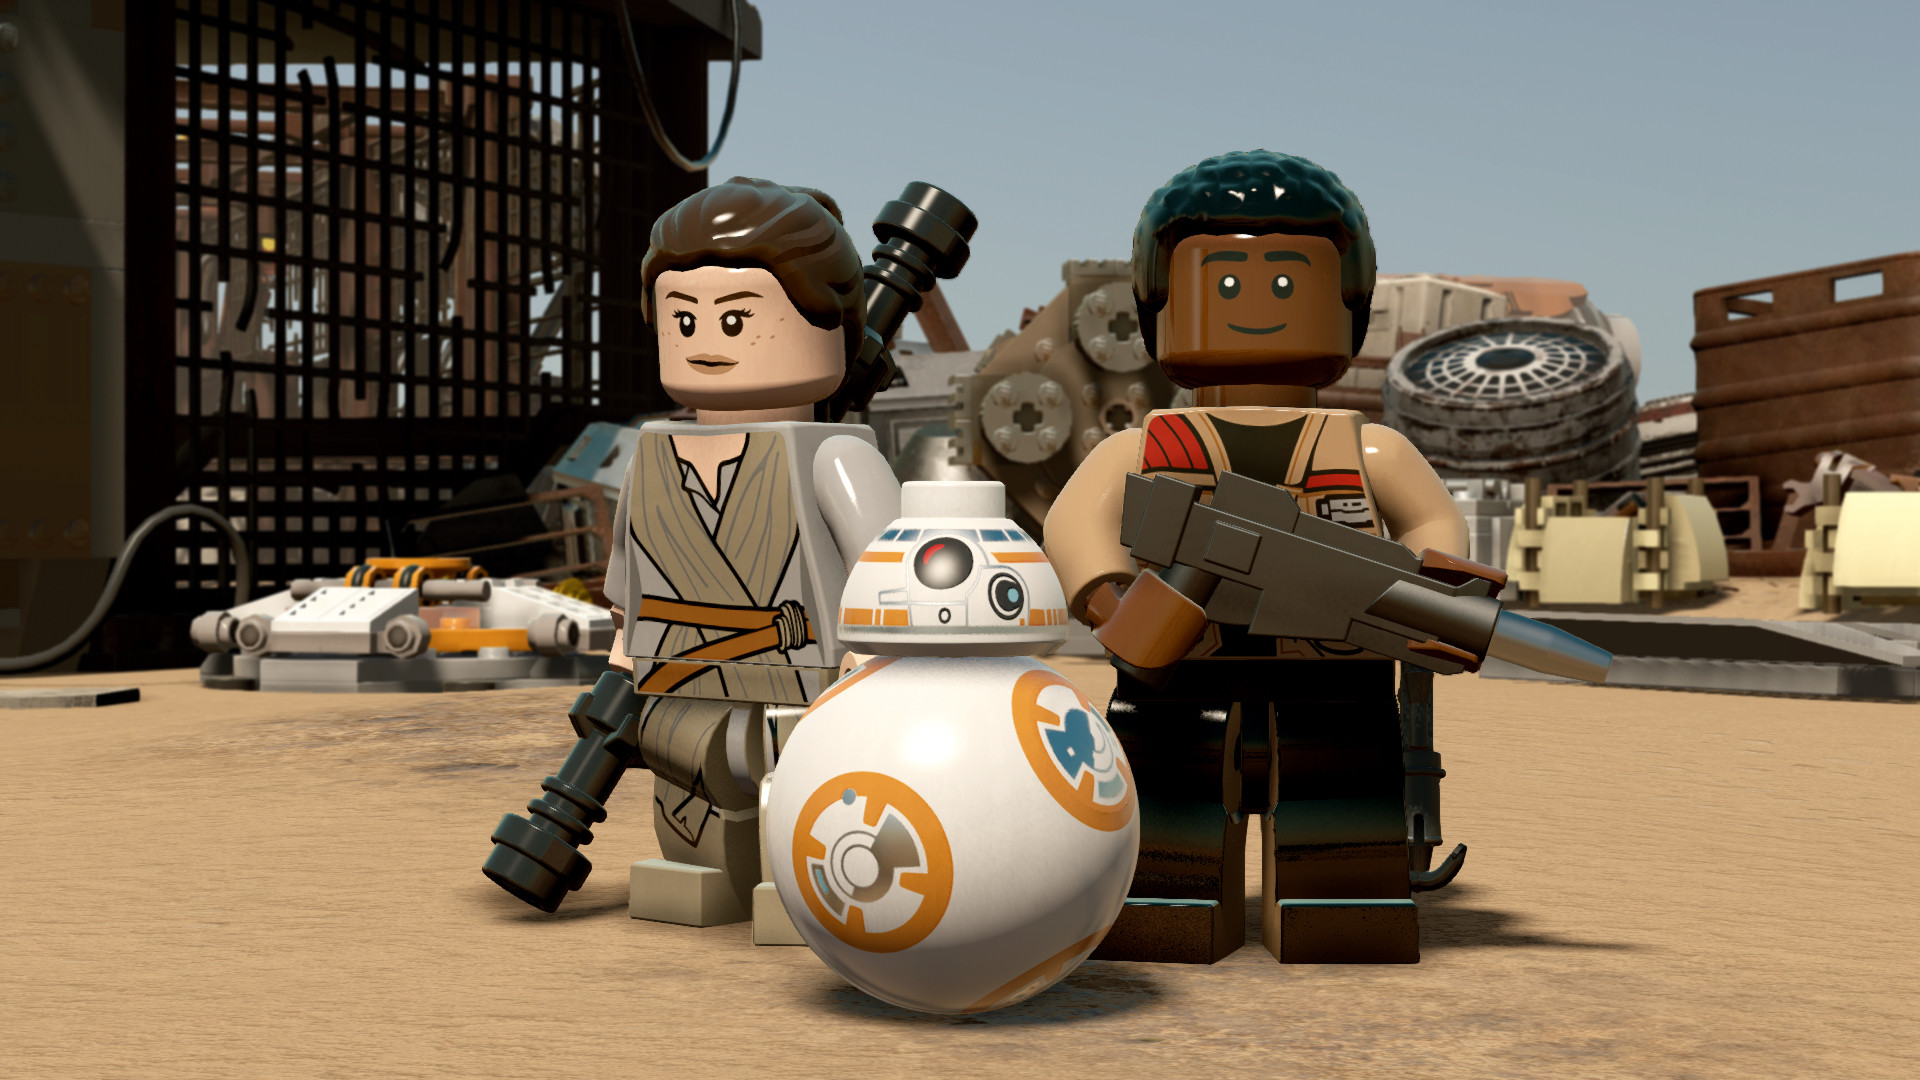 Download Lego Star Wars The Force Awakens for free